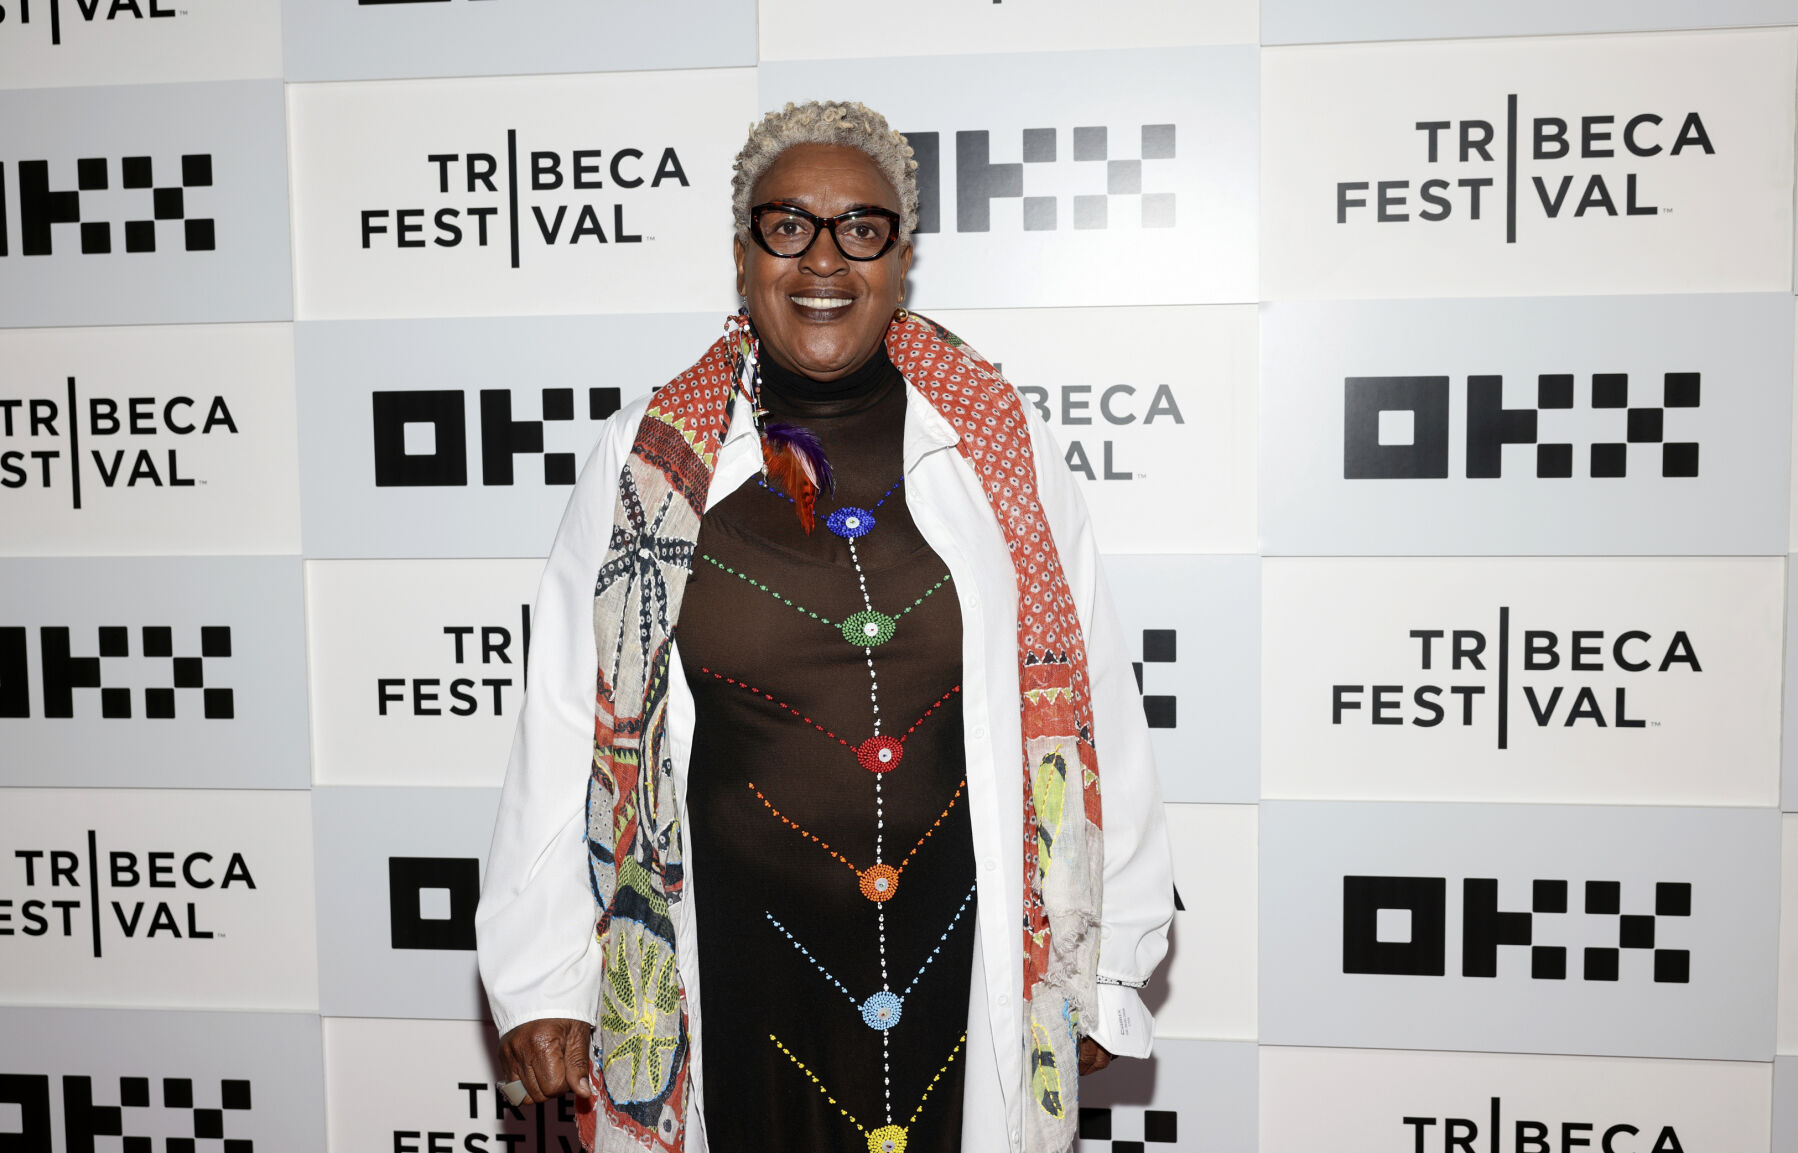 CCH Pounder attends the premiere of "Full Circle" at OKX Theater BMCC Tribeca Performing Arts Center during the Tribeca Festival on Sunday, June 11, 2023, in New York.